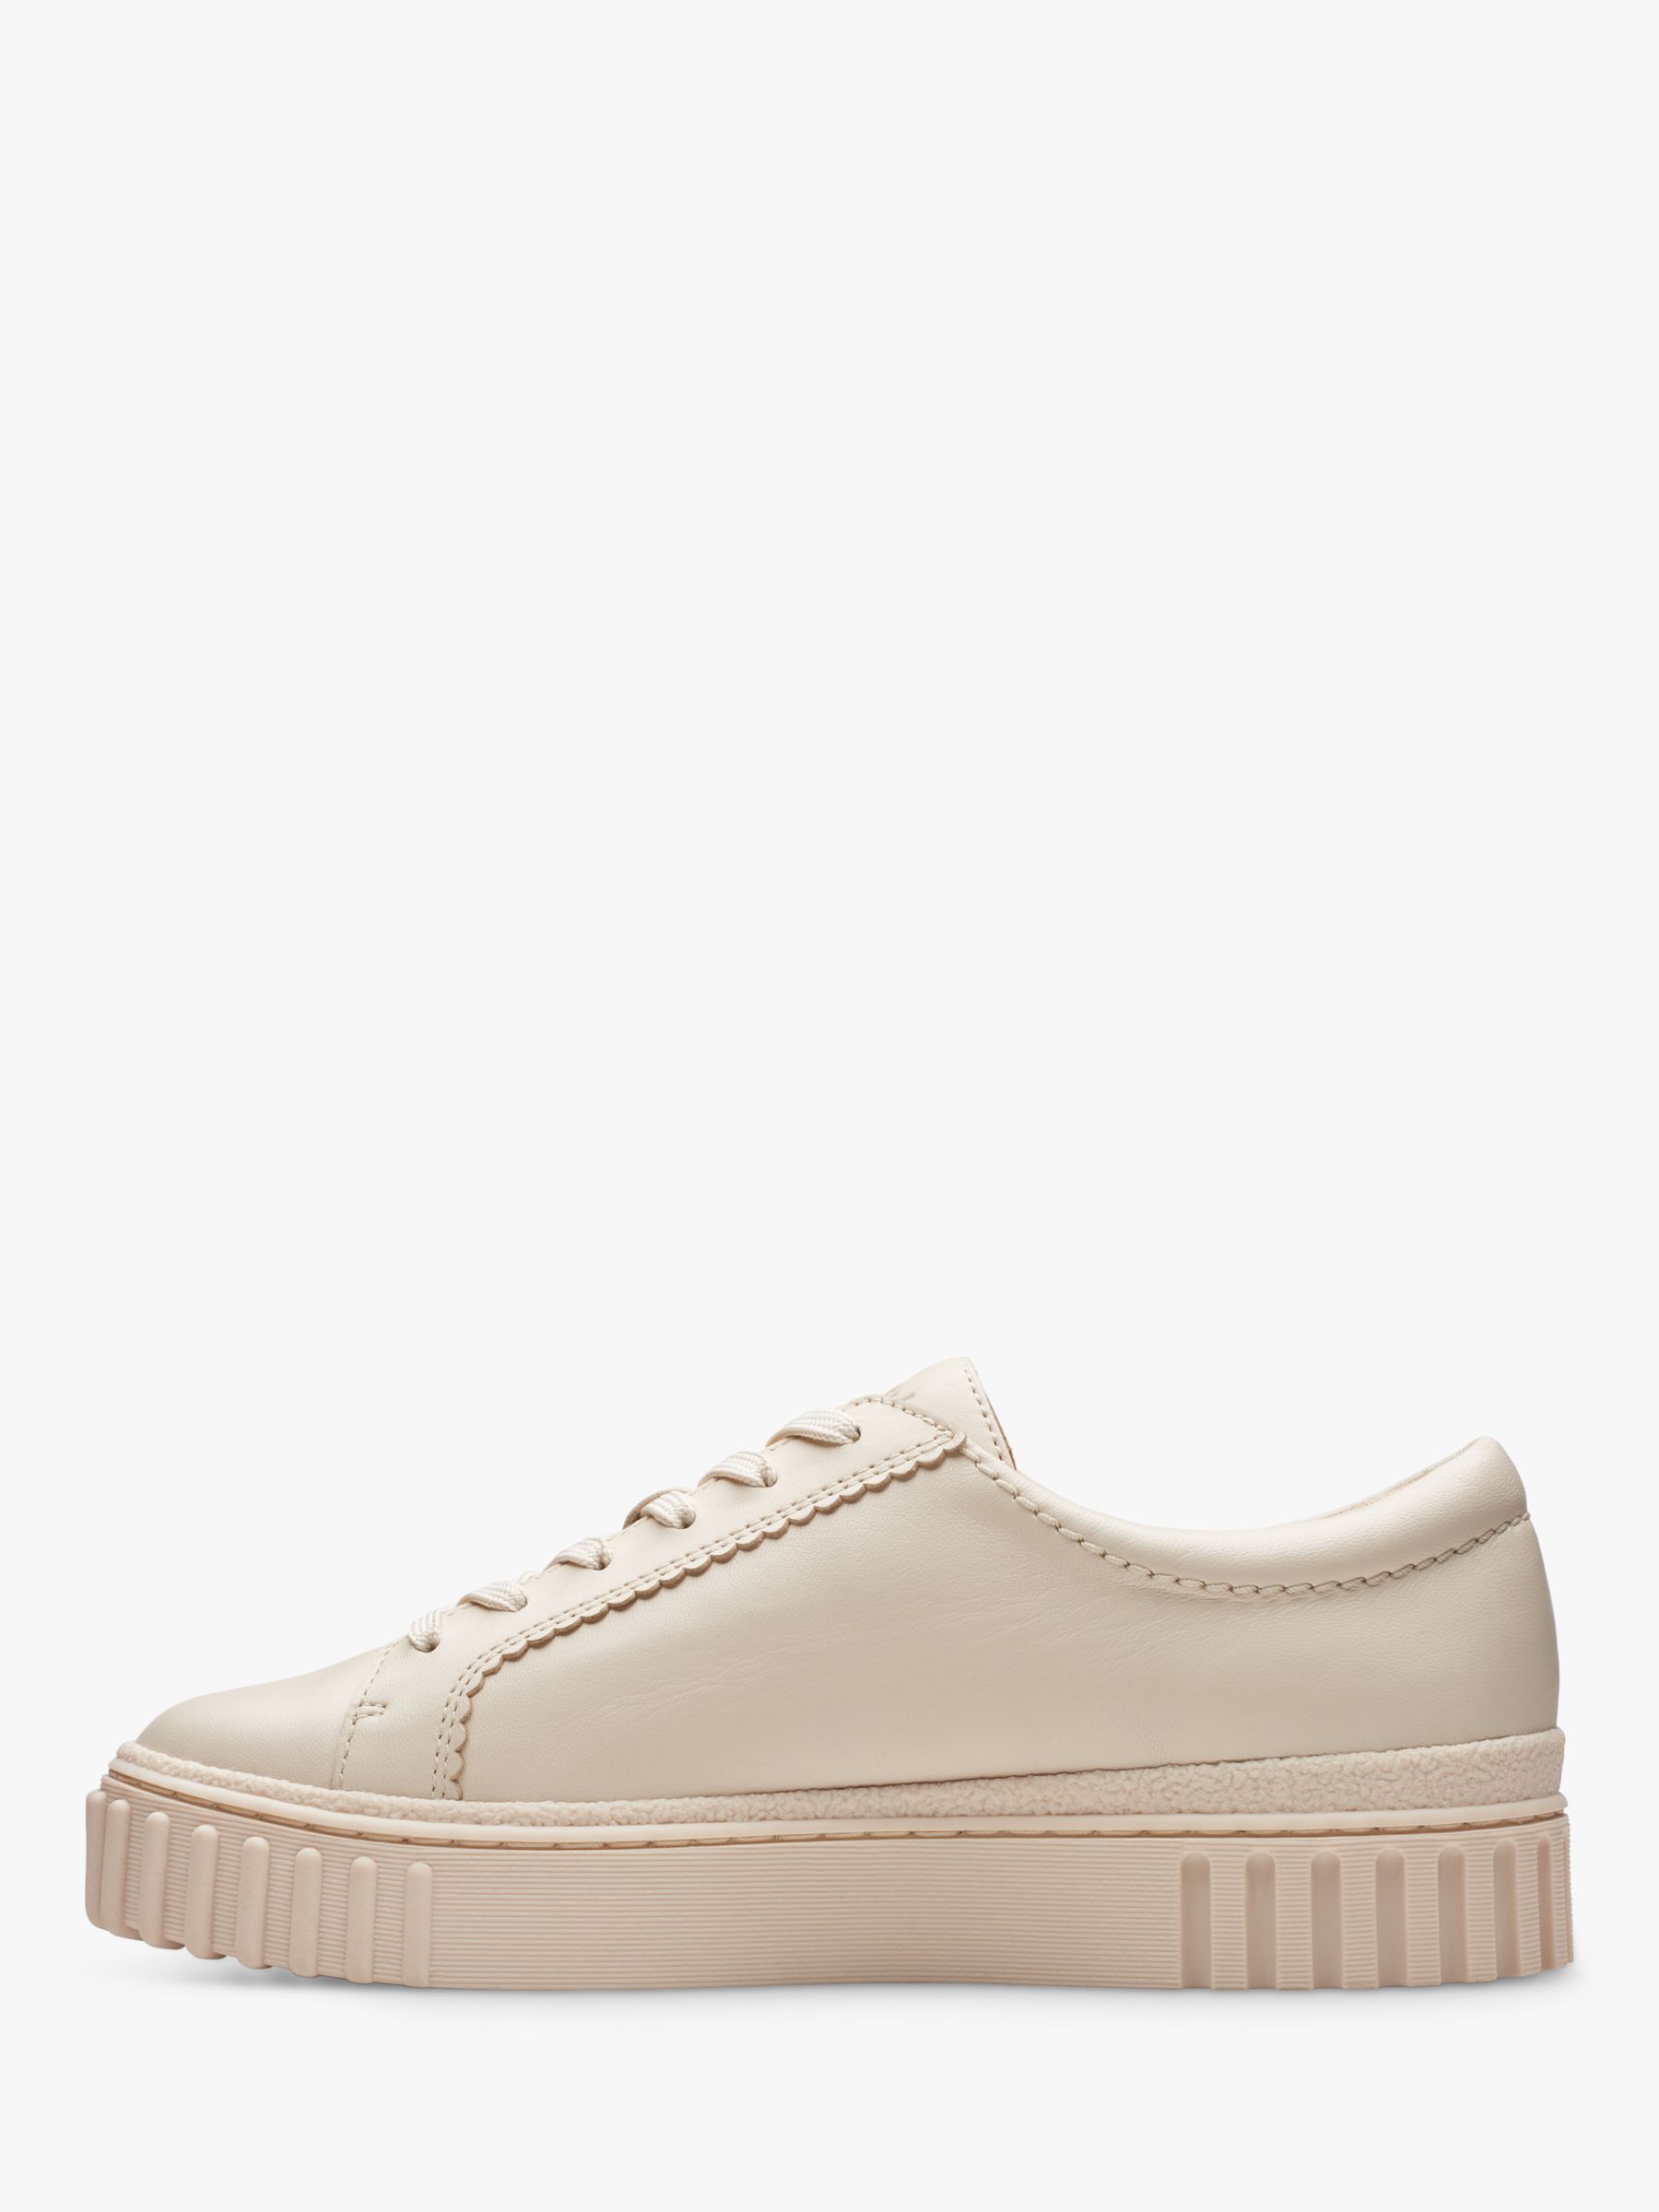 Clarks Mayhill Walk Leather Flatform Trainers, Cream Leather at John ...